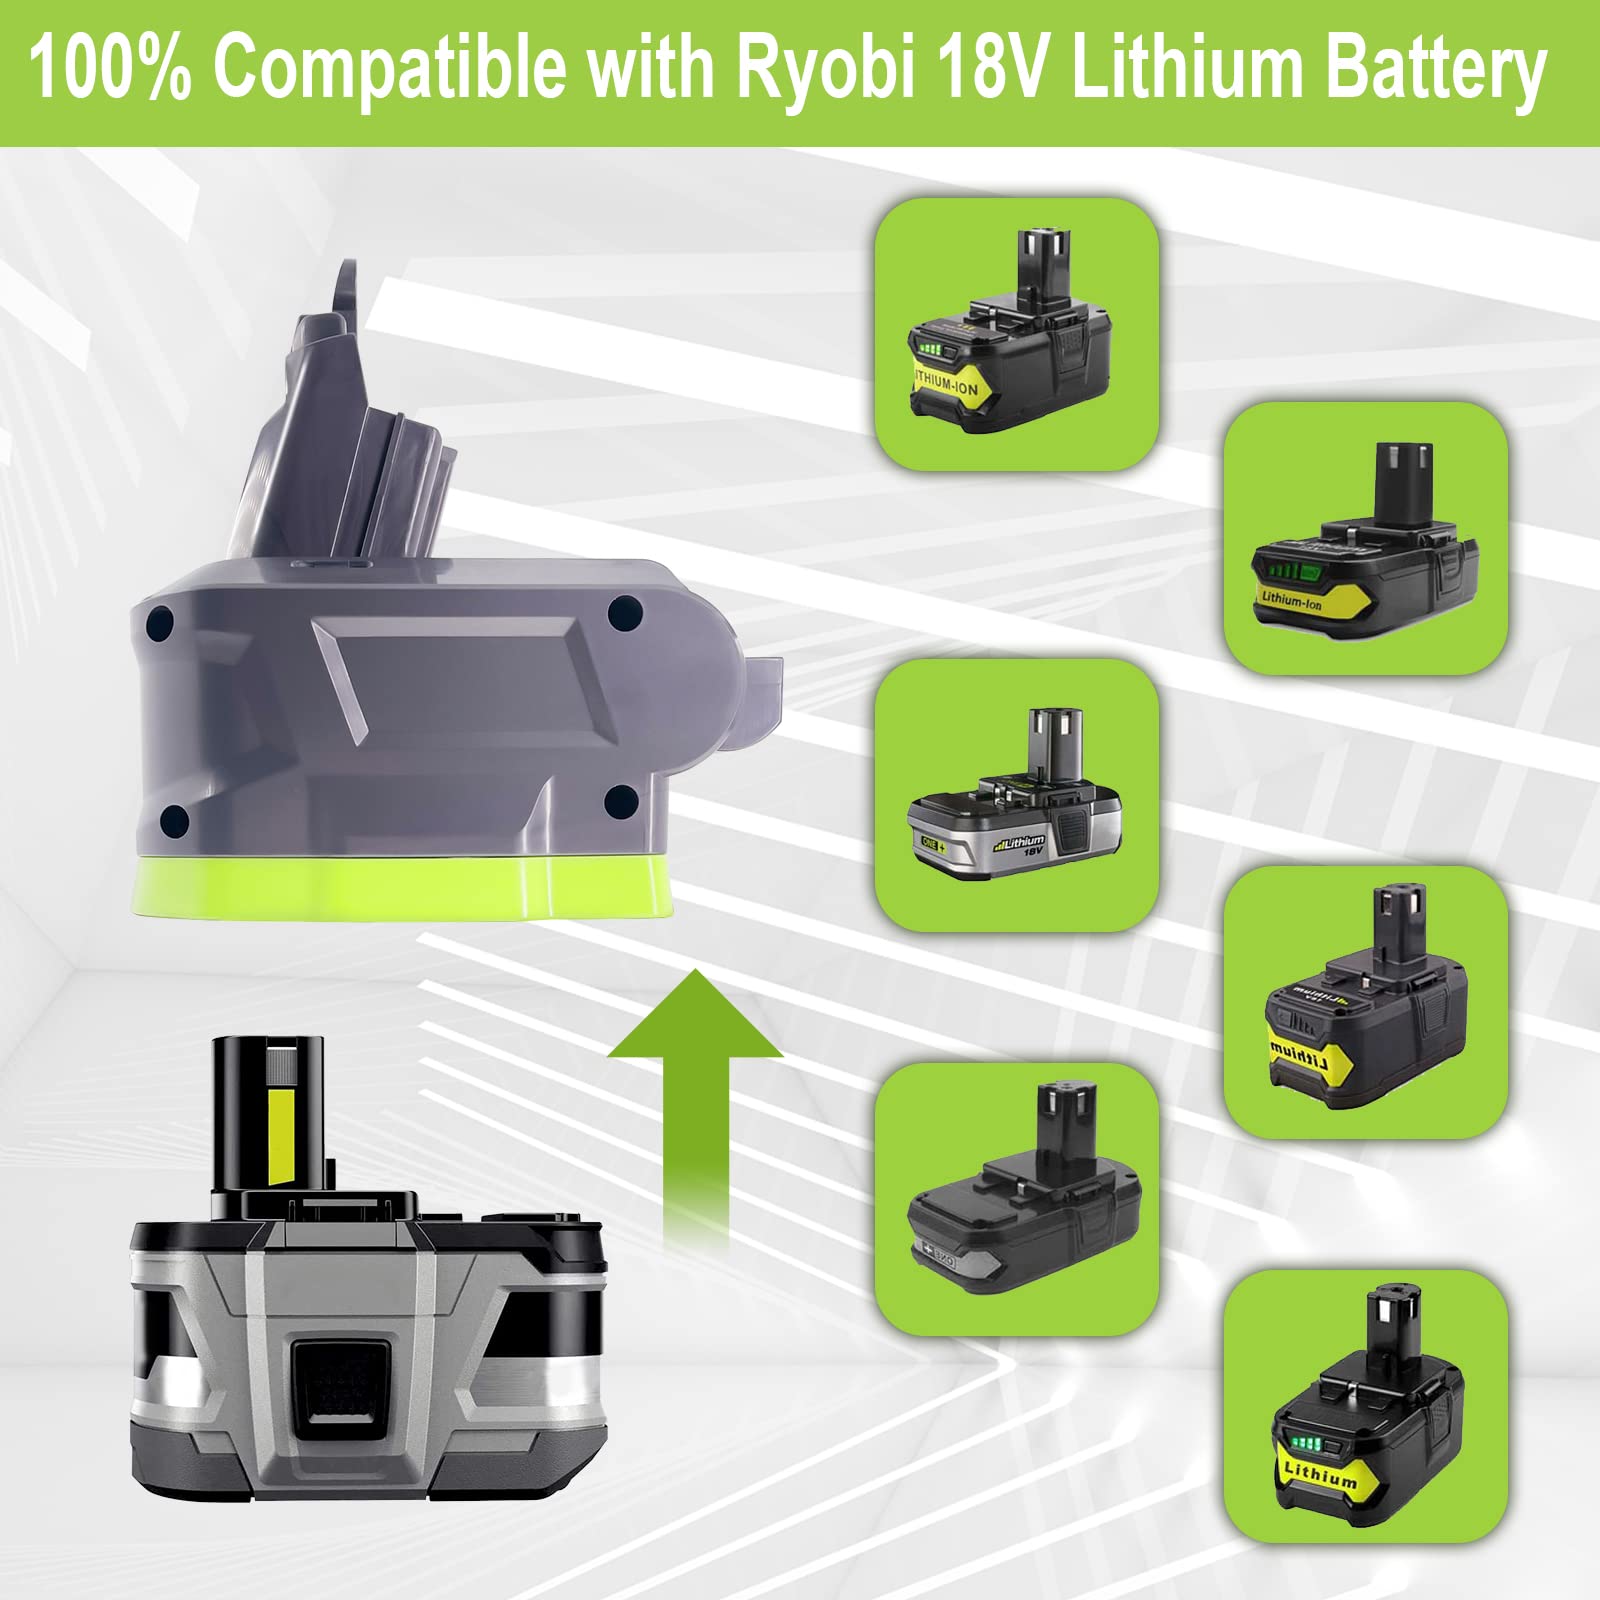 URUN V6 Battery Adapter for Ryobi 18V Lithium ion Battery to for Dyson V6 Battery Replacement, Work for Dyson V6 Series Vacuum Cleaners SV03 SV04 SV09 Animal Absolute Motorhead